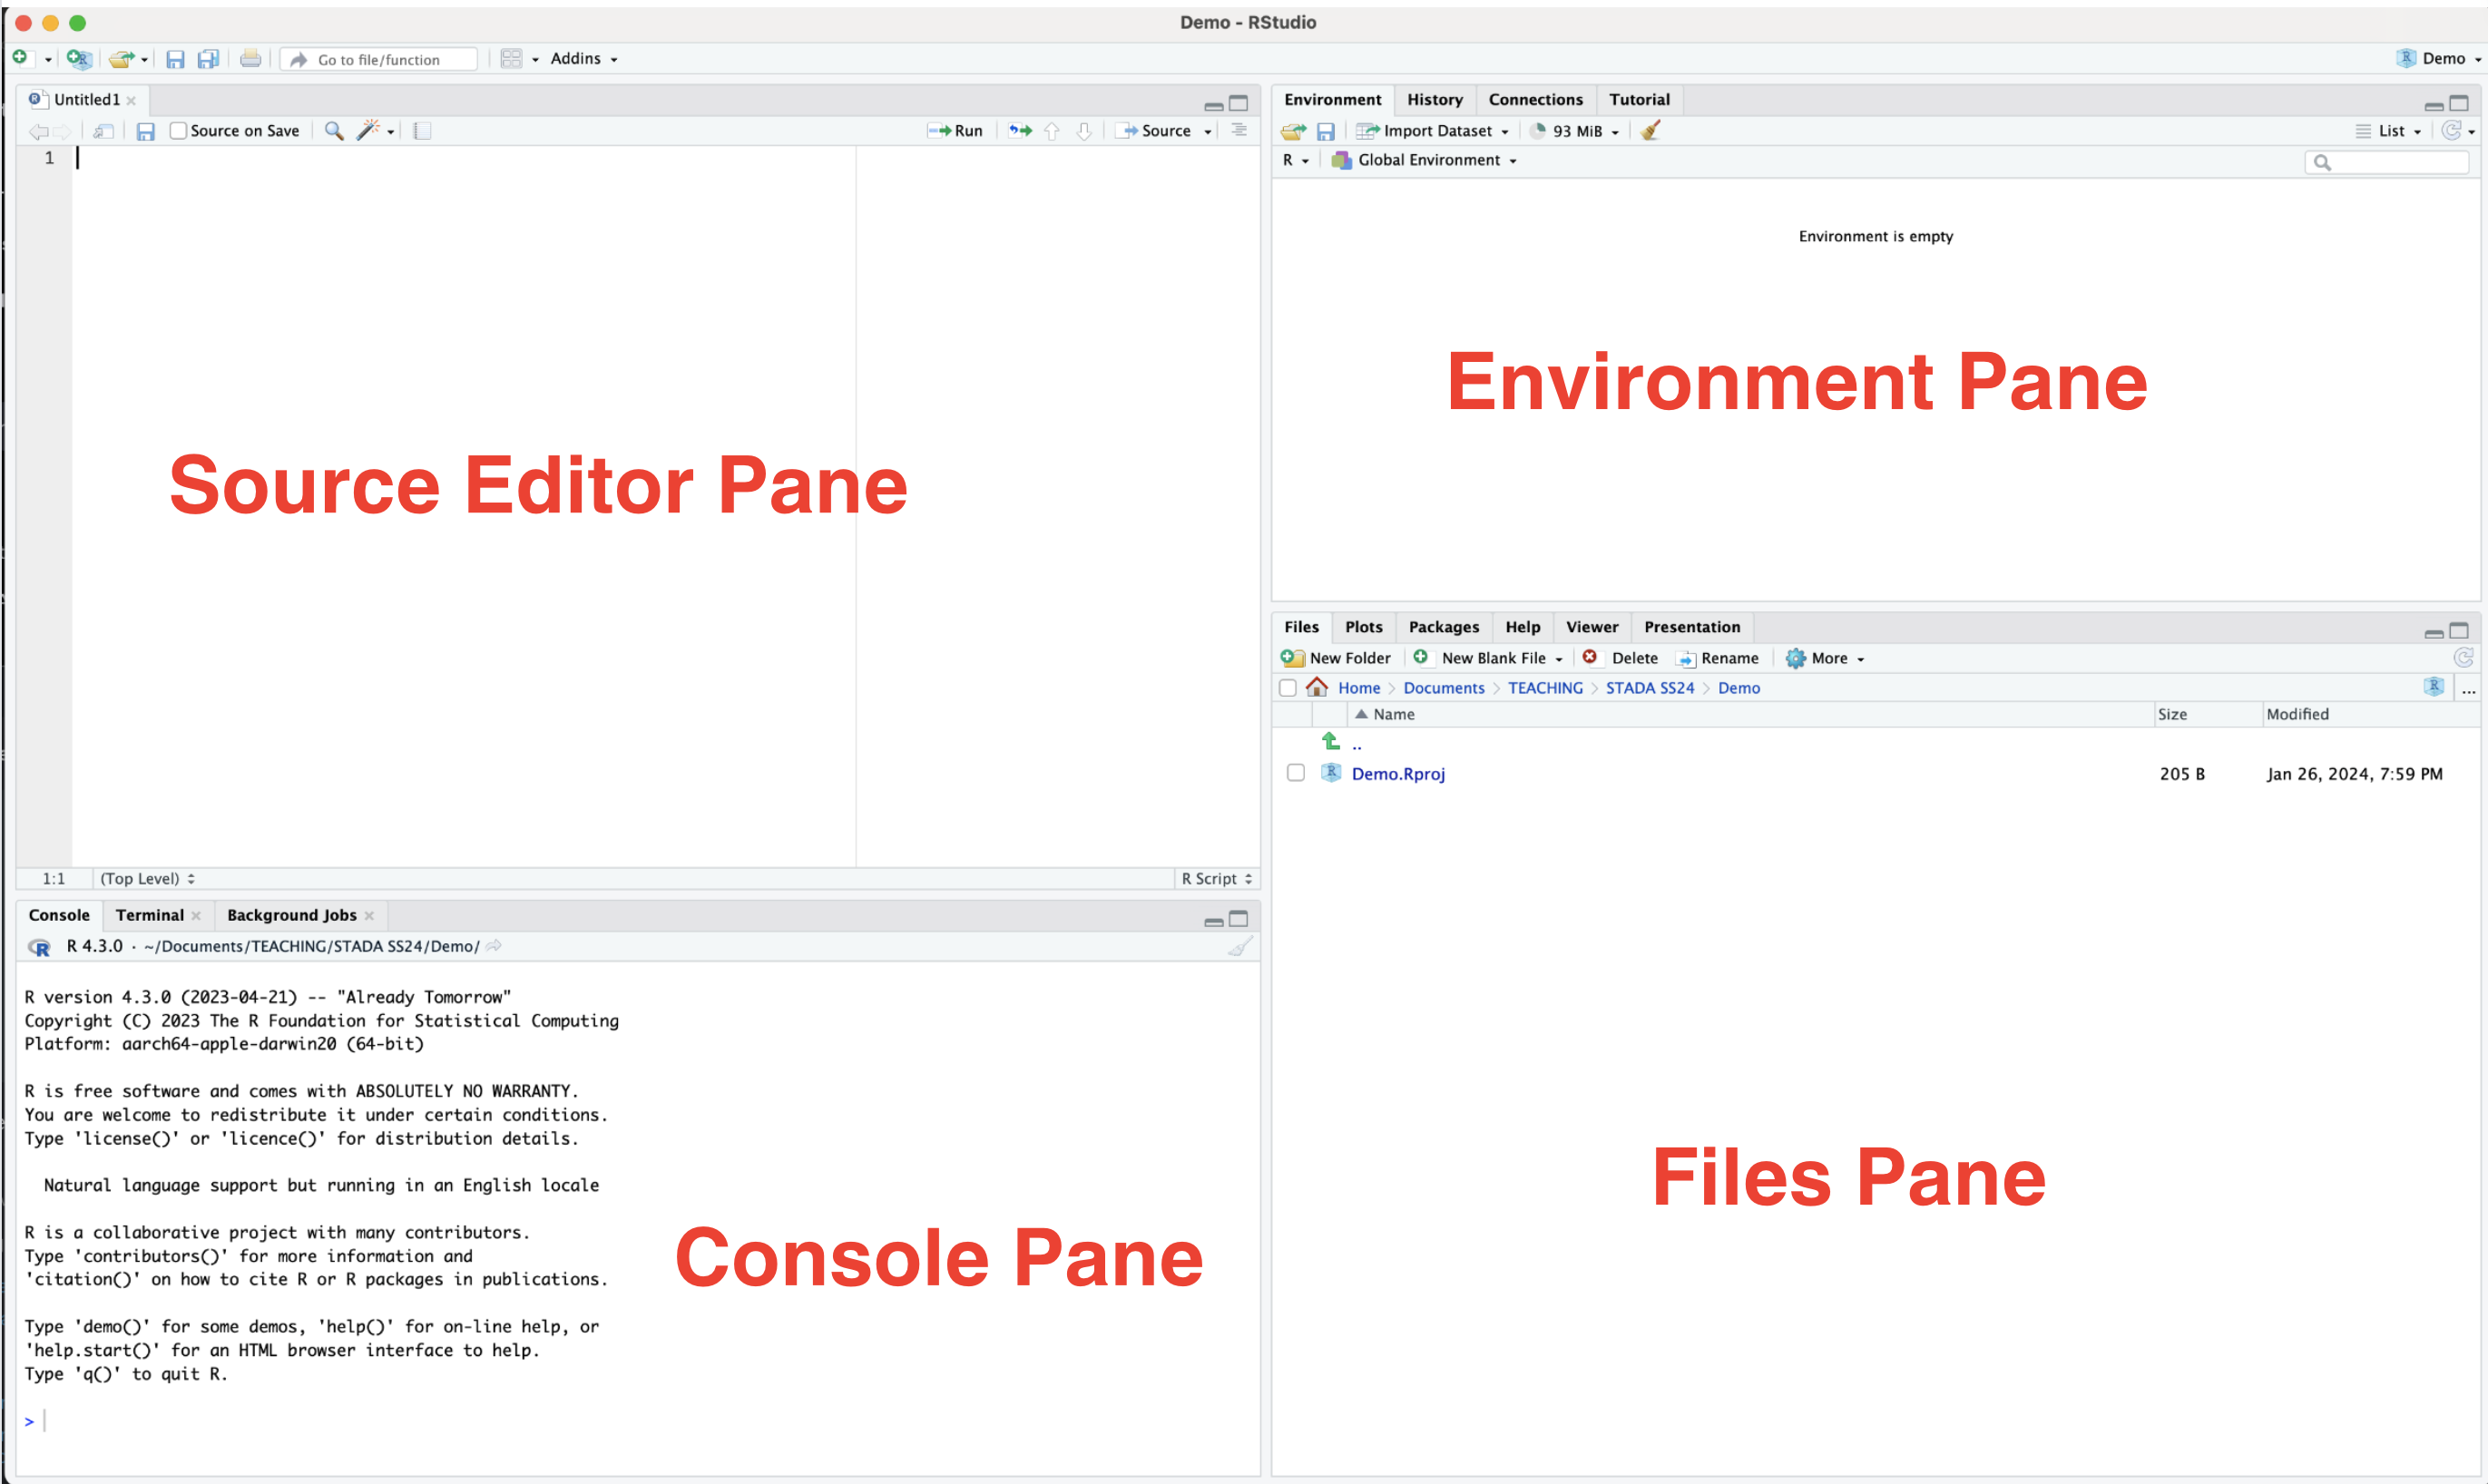 Overview of the 4 panes in RStudio